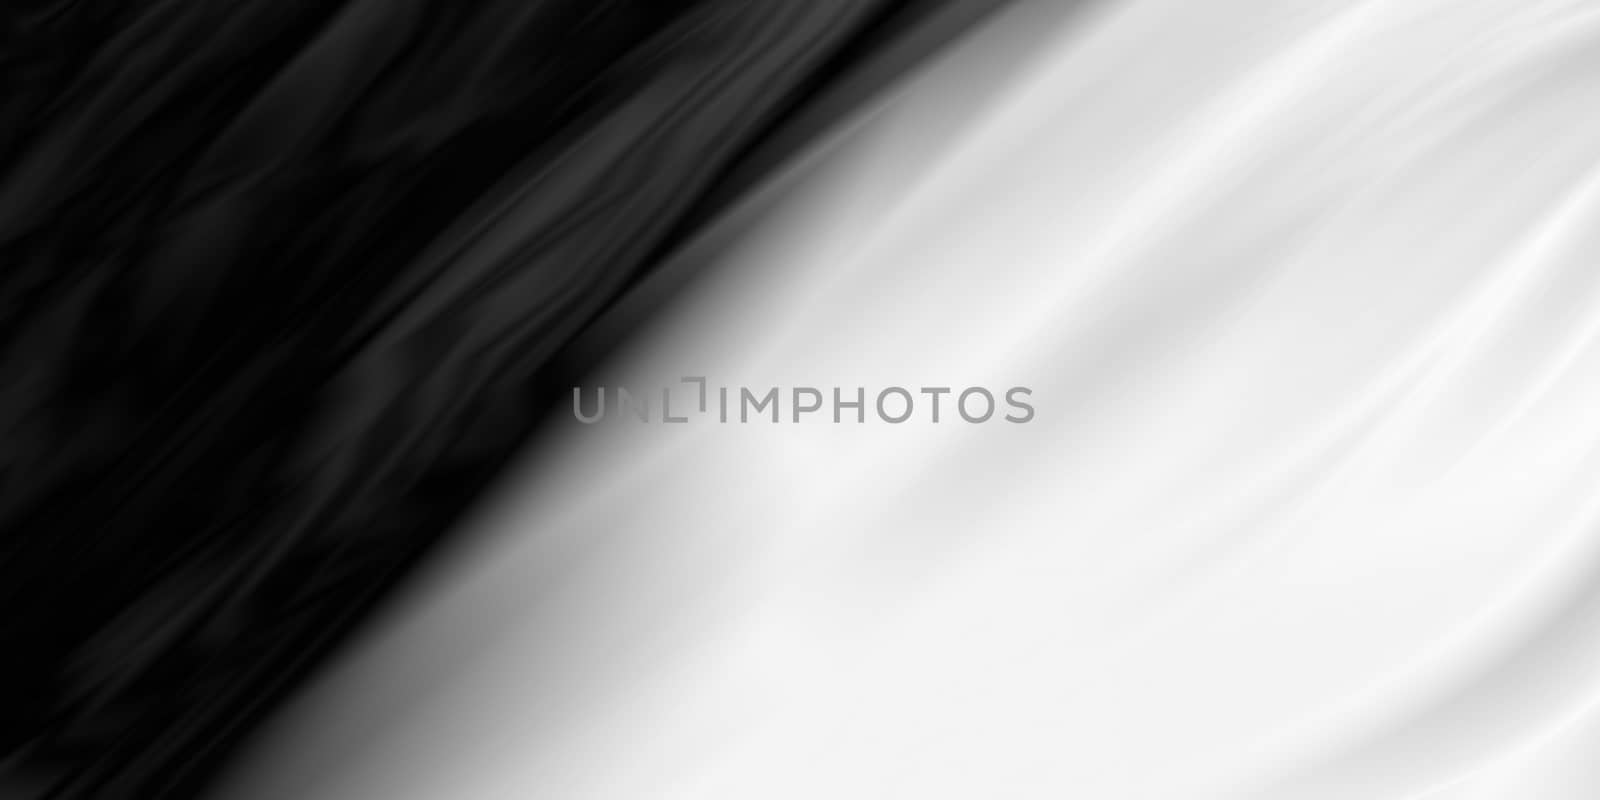 Abstract white and black background with copy space